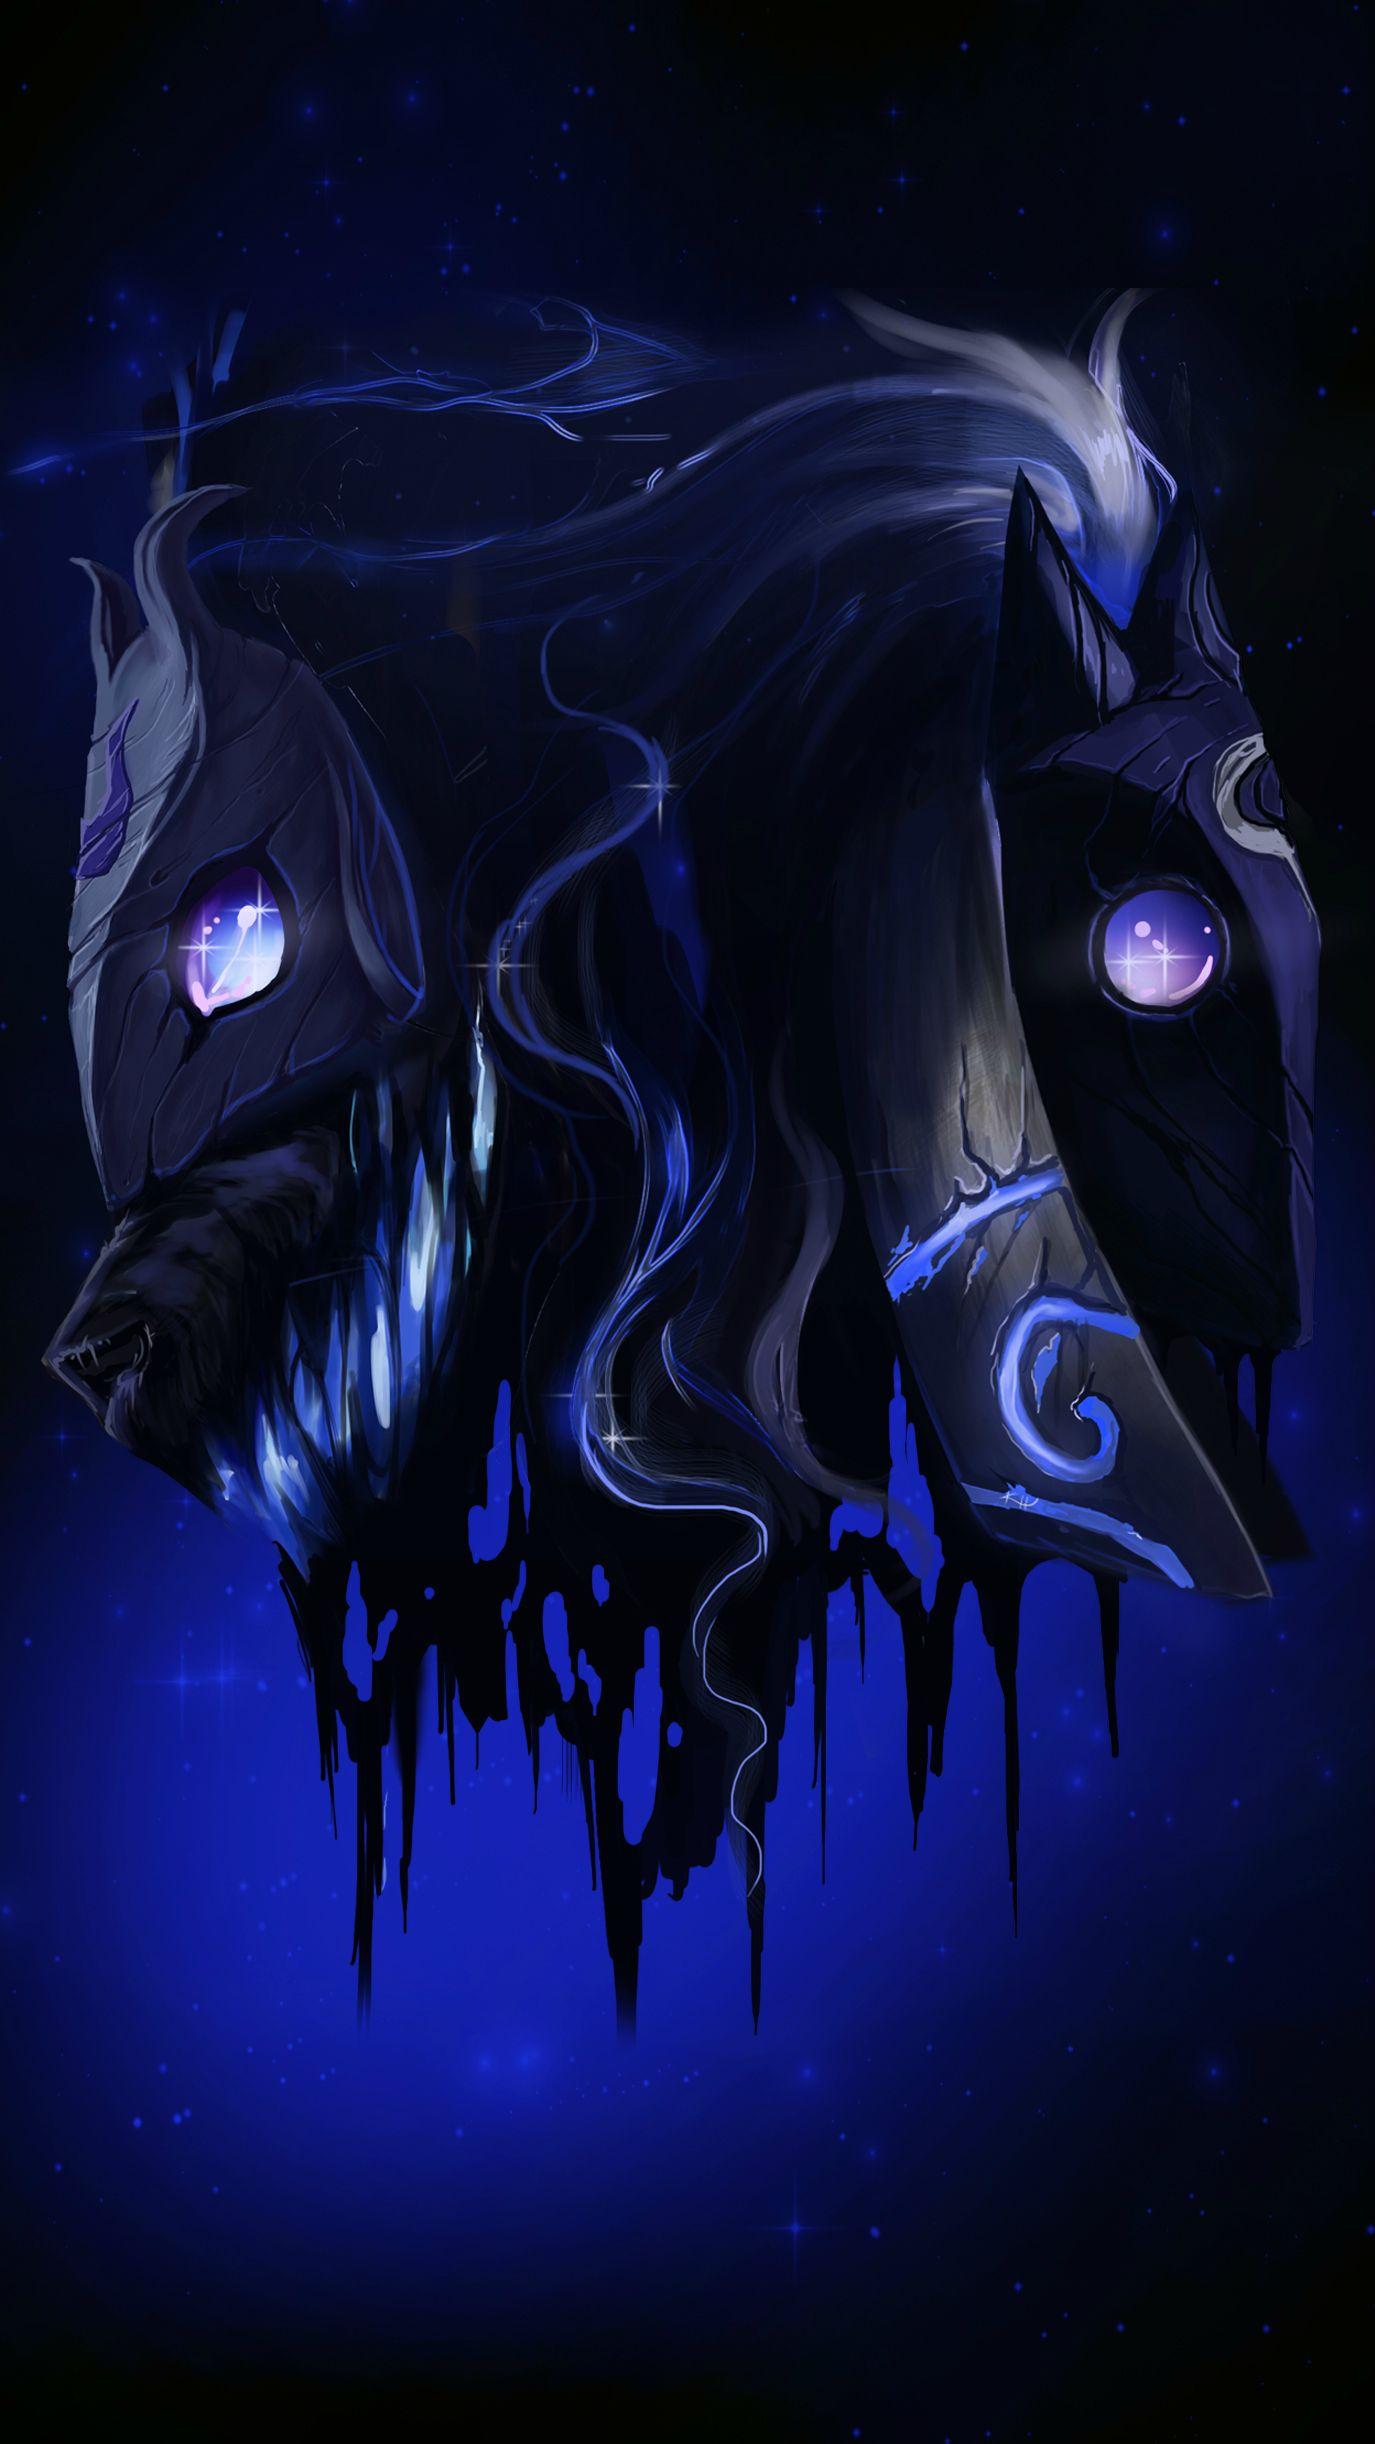 Kindred 1080x1920 Wolf and Lamb by KH for Mobile Phone